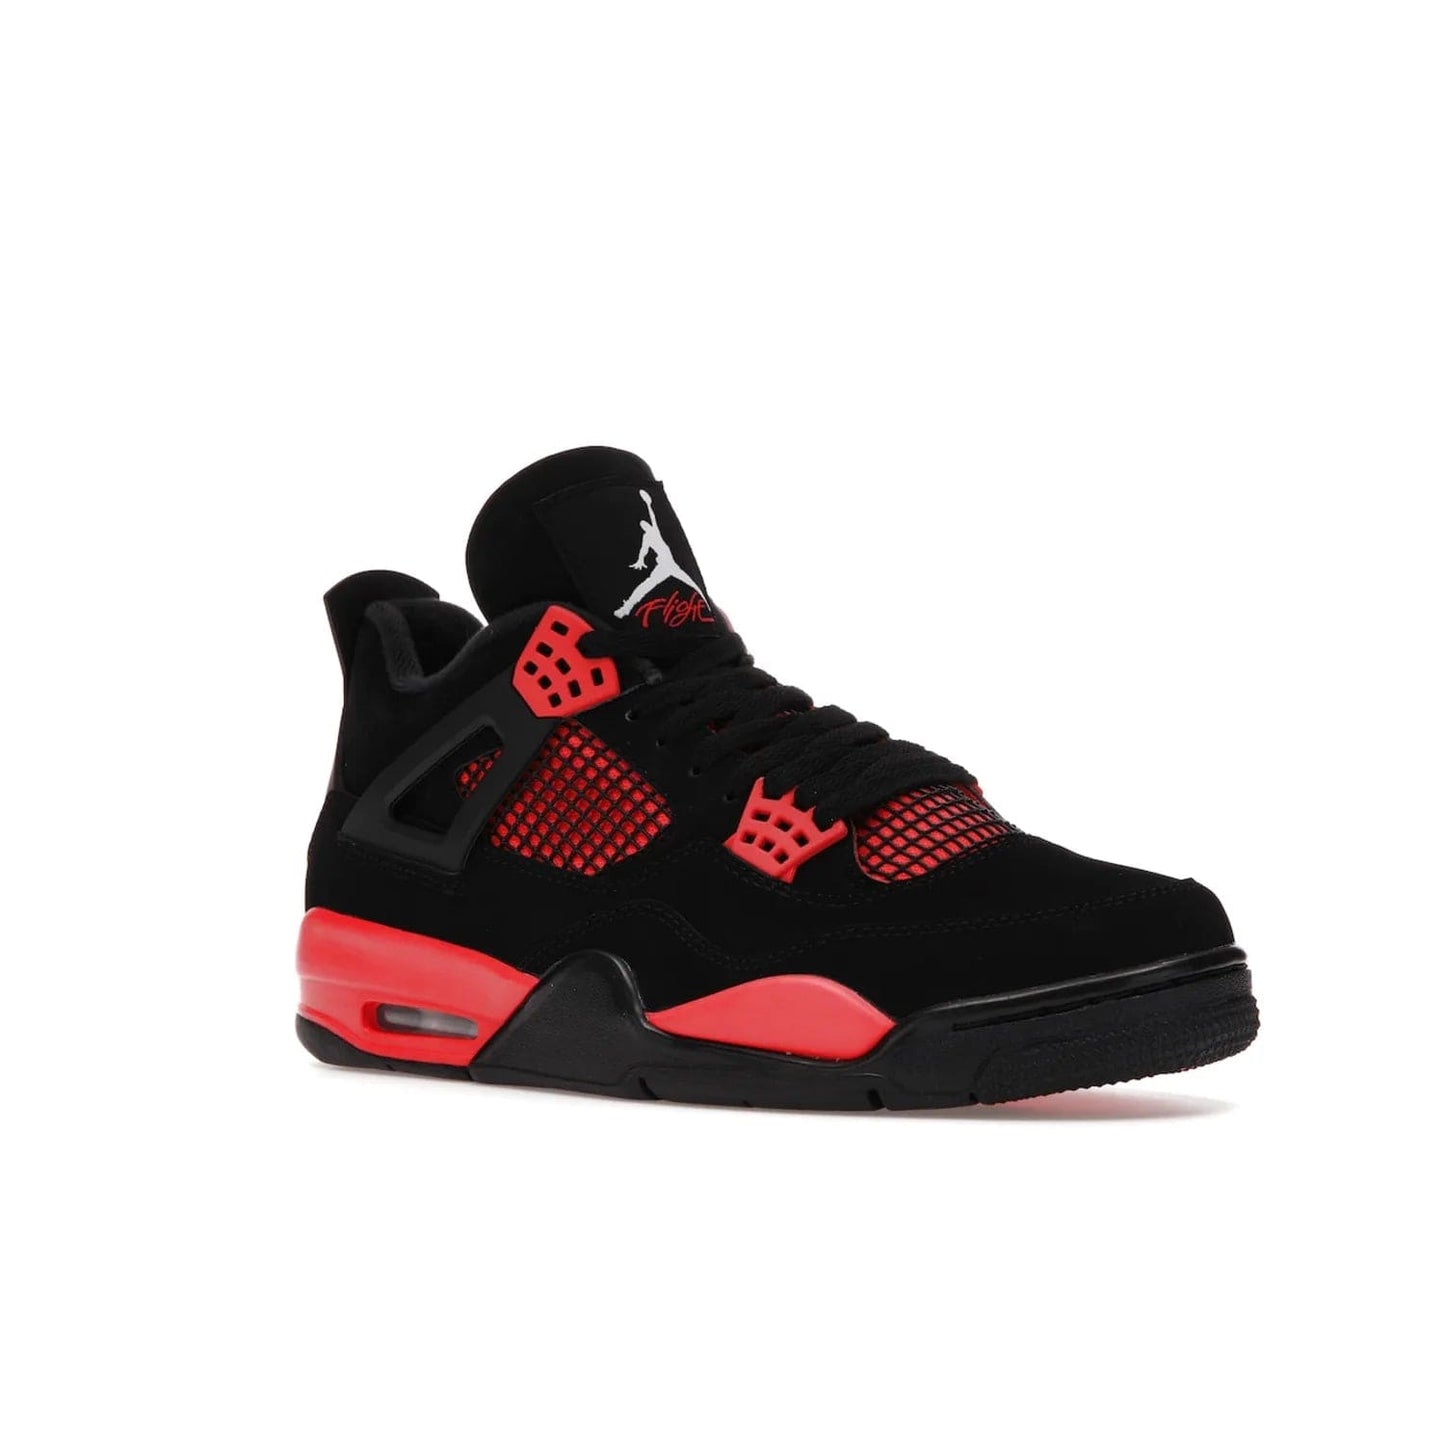 Jordan 4 Retro Red Thunder - Image 5 - Only at www.BallersClubKickz.com - Upscale your footwear with the Air Jordan 4 Retro Red Thunder. Featuring a Durabuck upper, red underlays, signature Flight patch, and vibrant red midsole, this retro sneaker adds style and edge. Releases in January 2022.